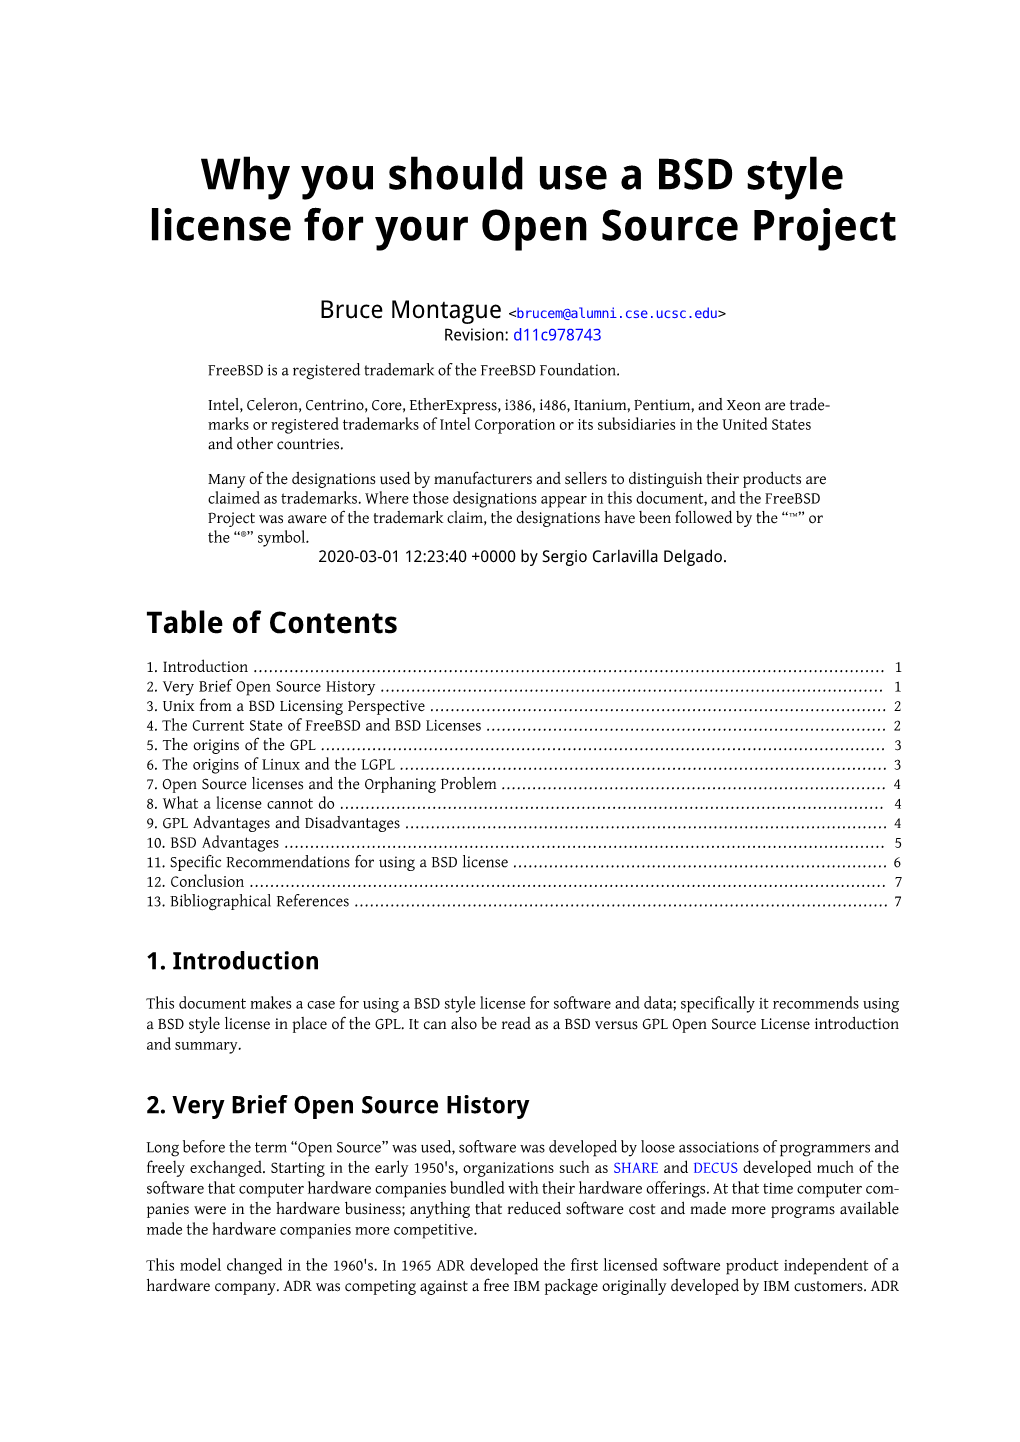 Why You Should Use a BSD Style License for Your Open Source Project